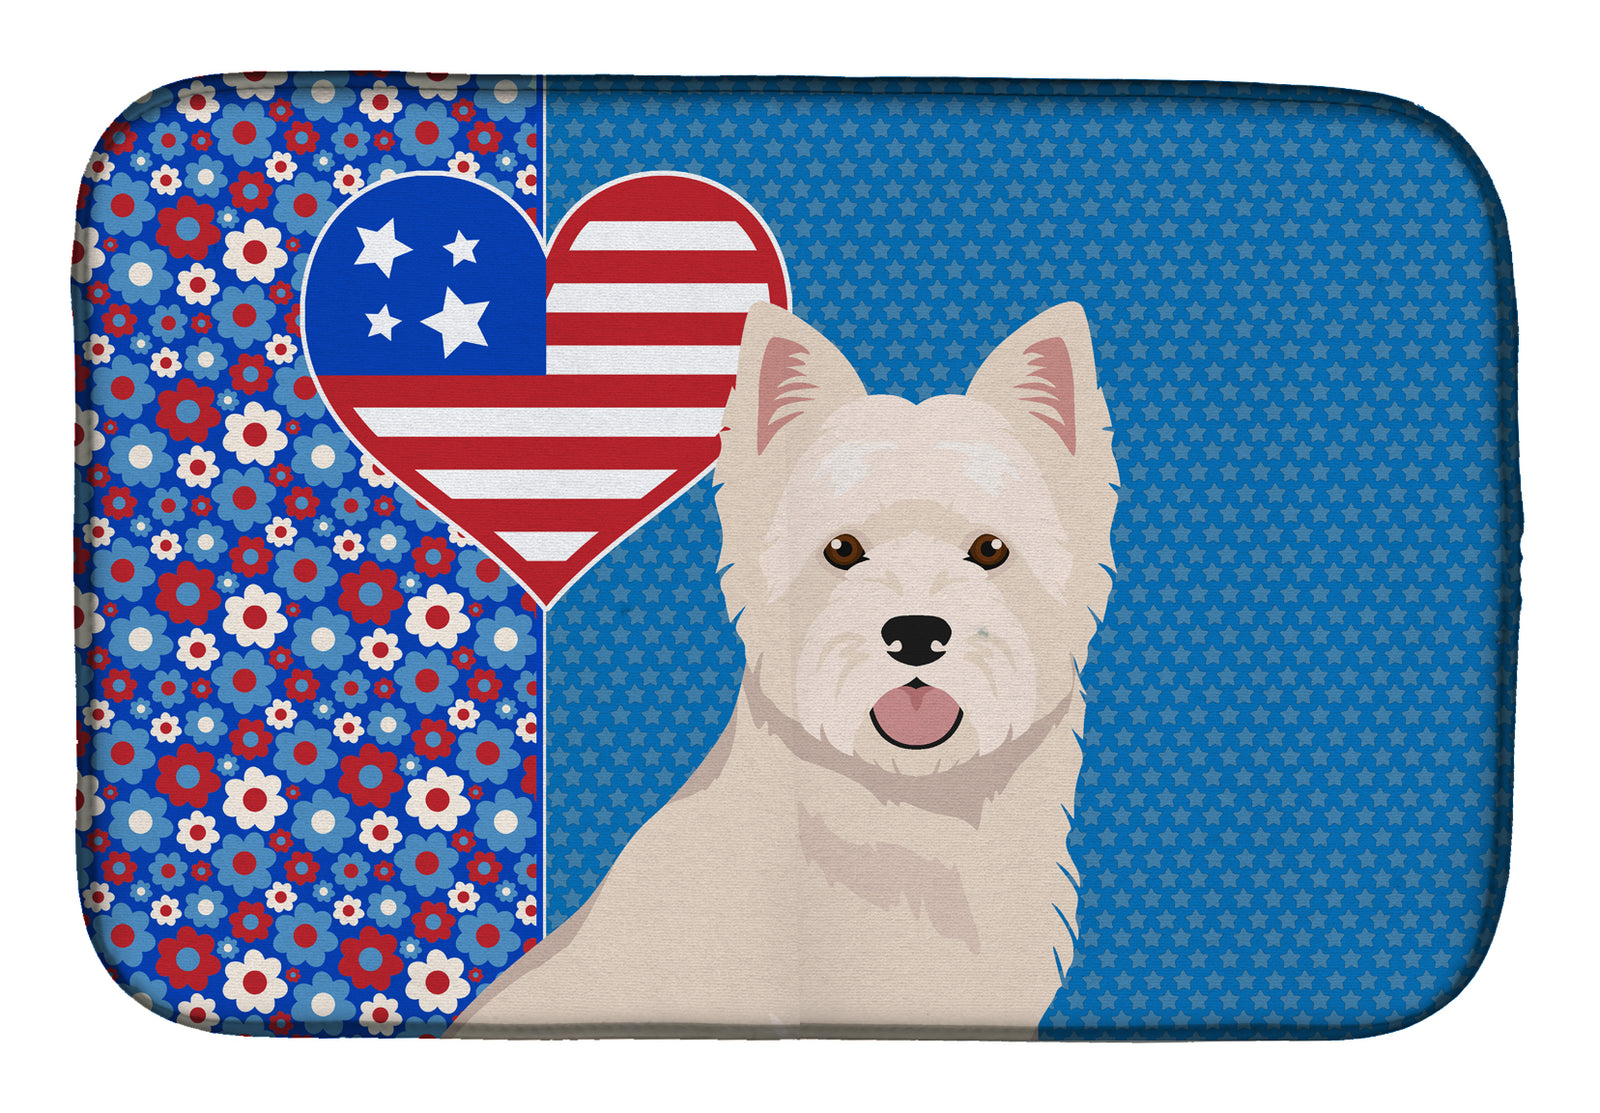 Westie West Highland White Terrier USA American Dish Drying Mat